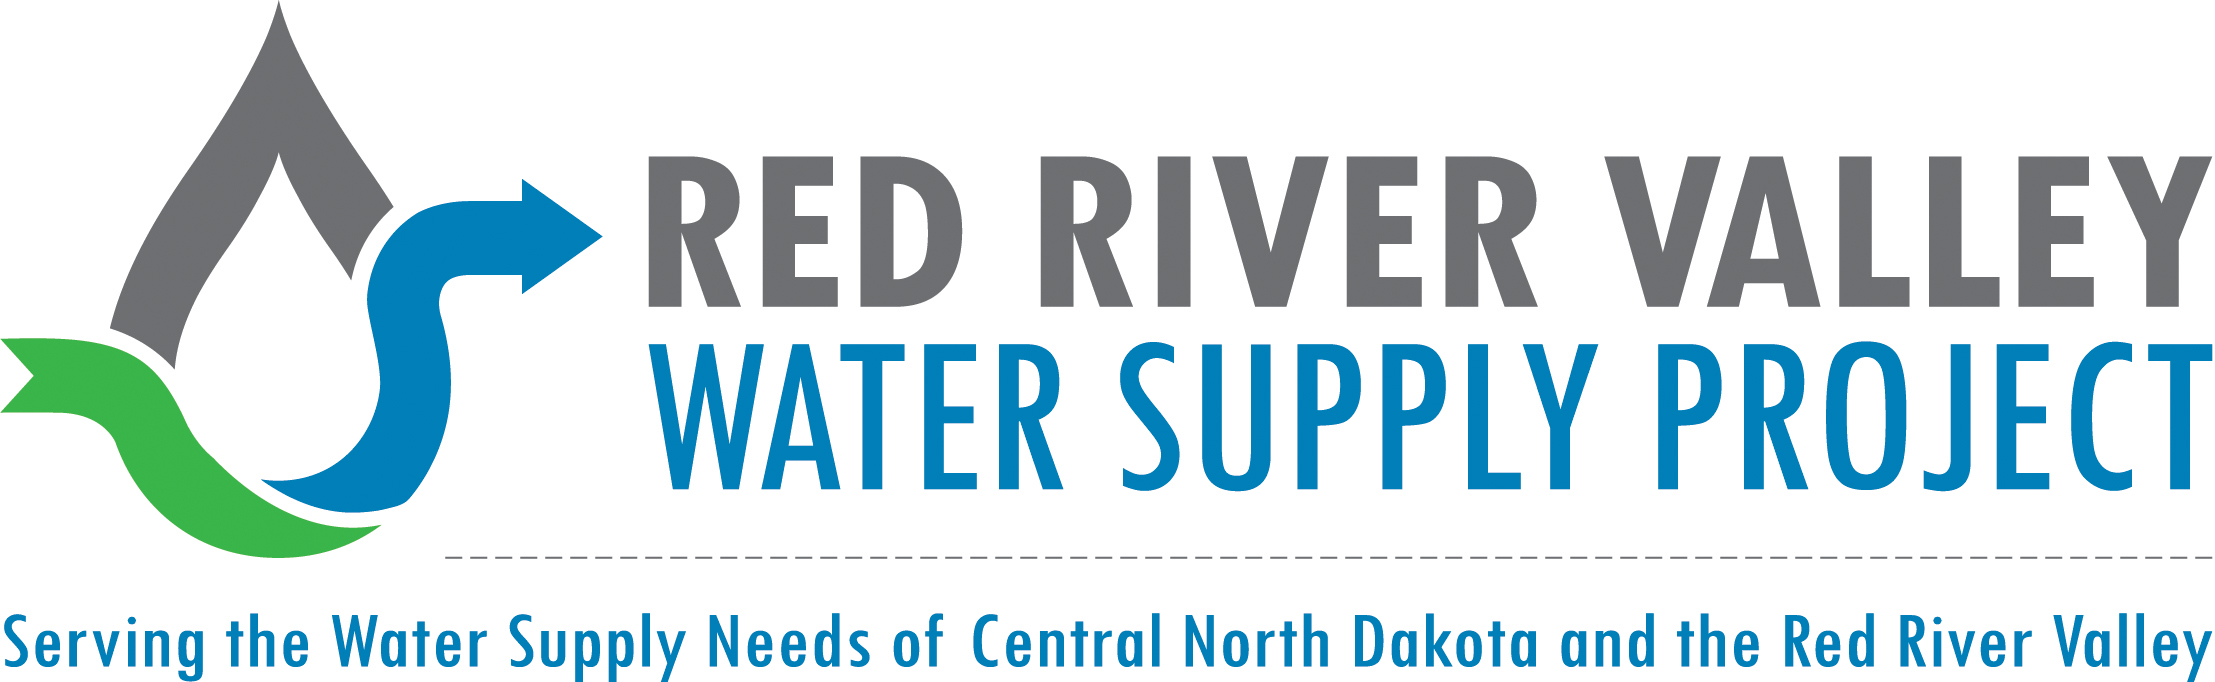 Red River Valley Water Supply Project